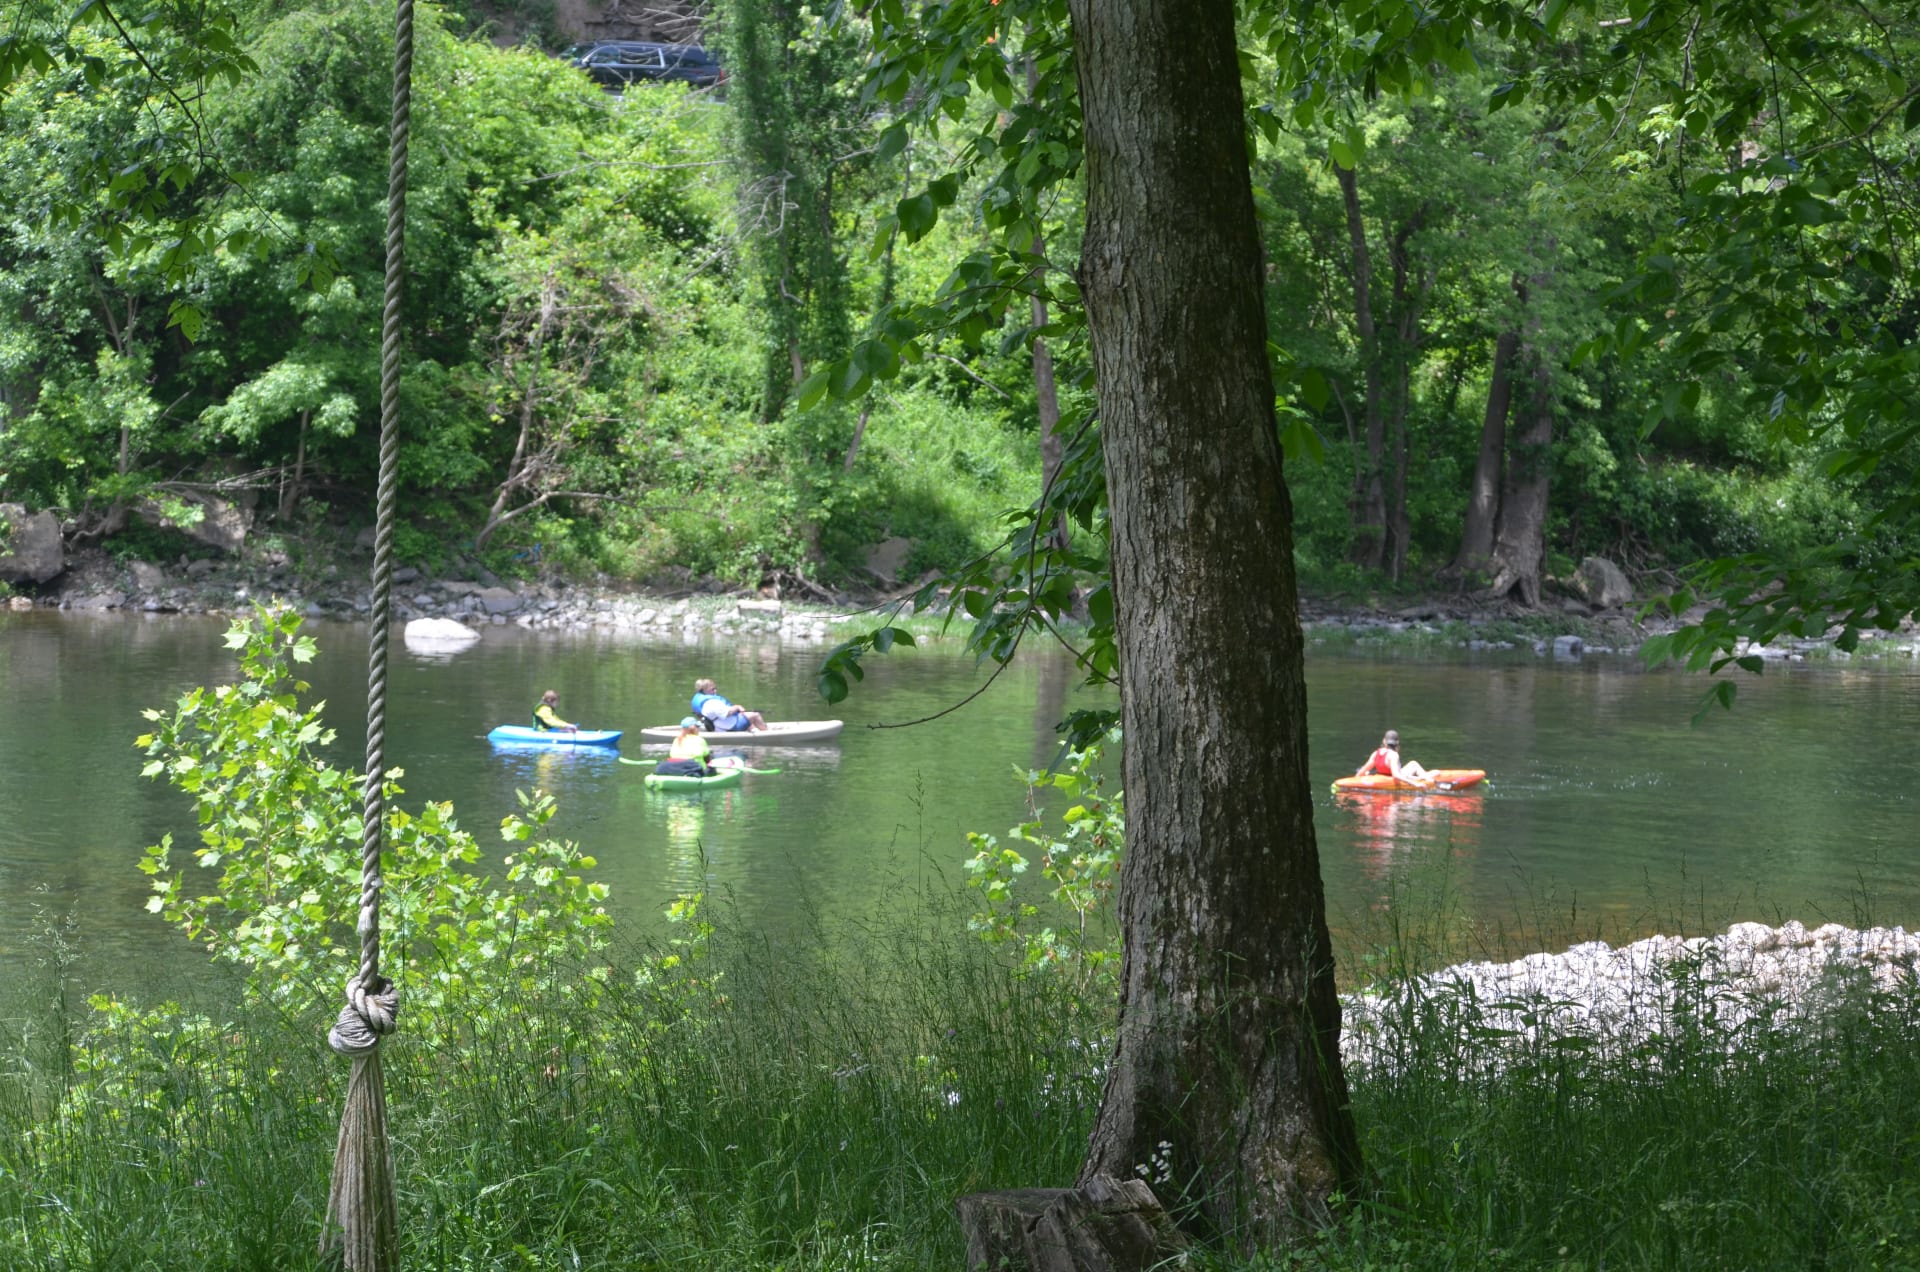 The Greenbrier is a great river to float or paddle!  There is a also a good swimming hole in front of campsite #2.